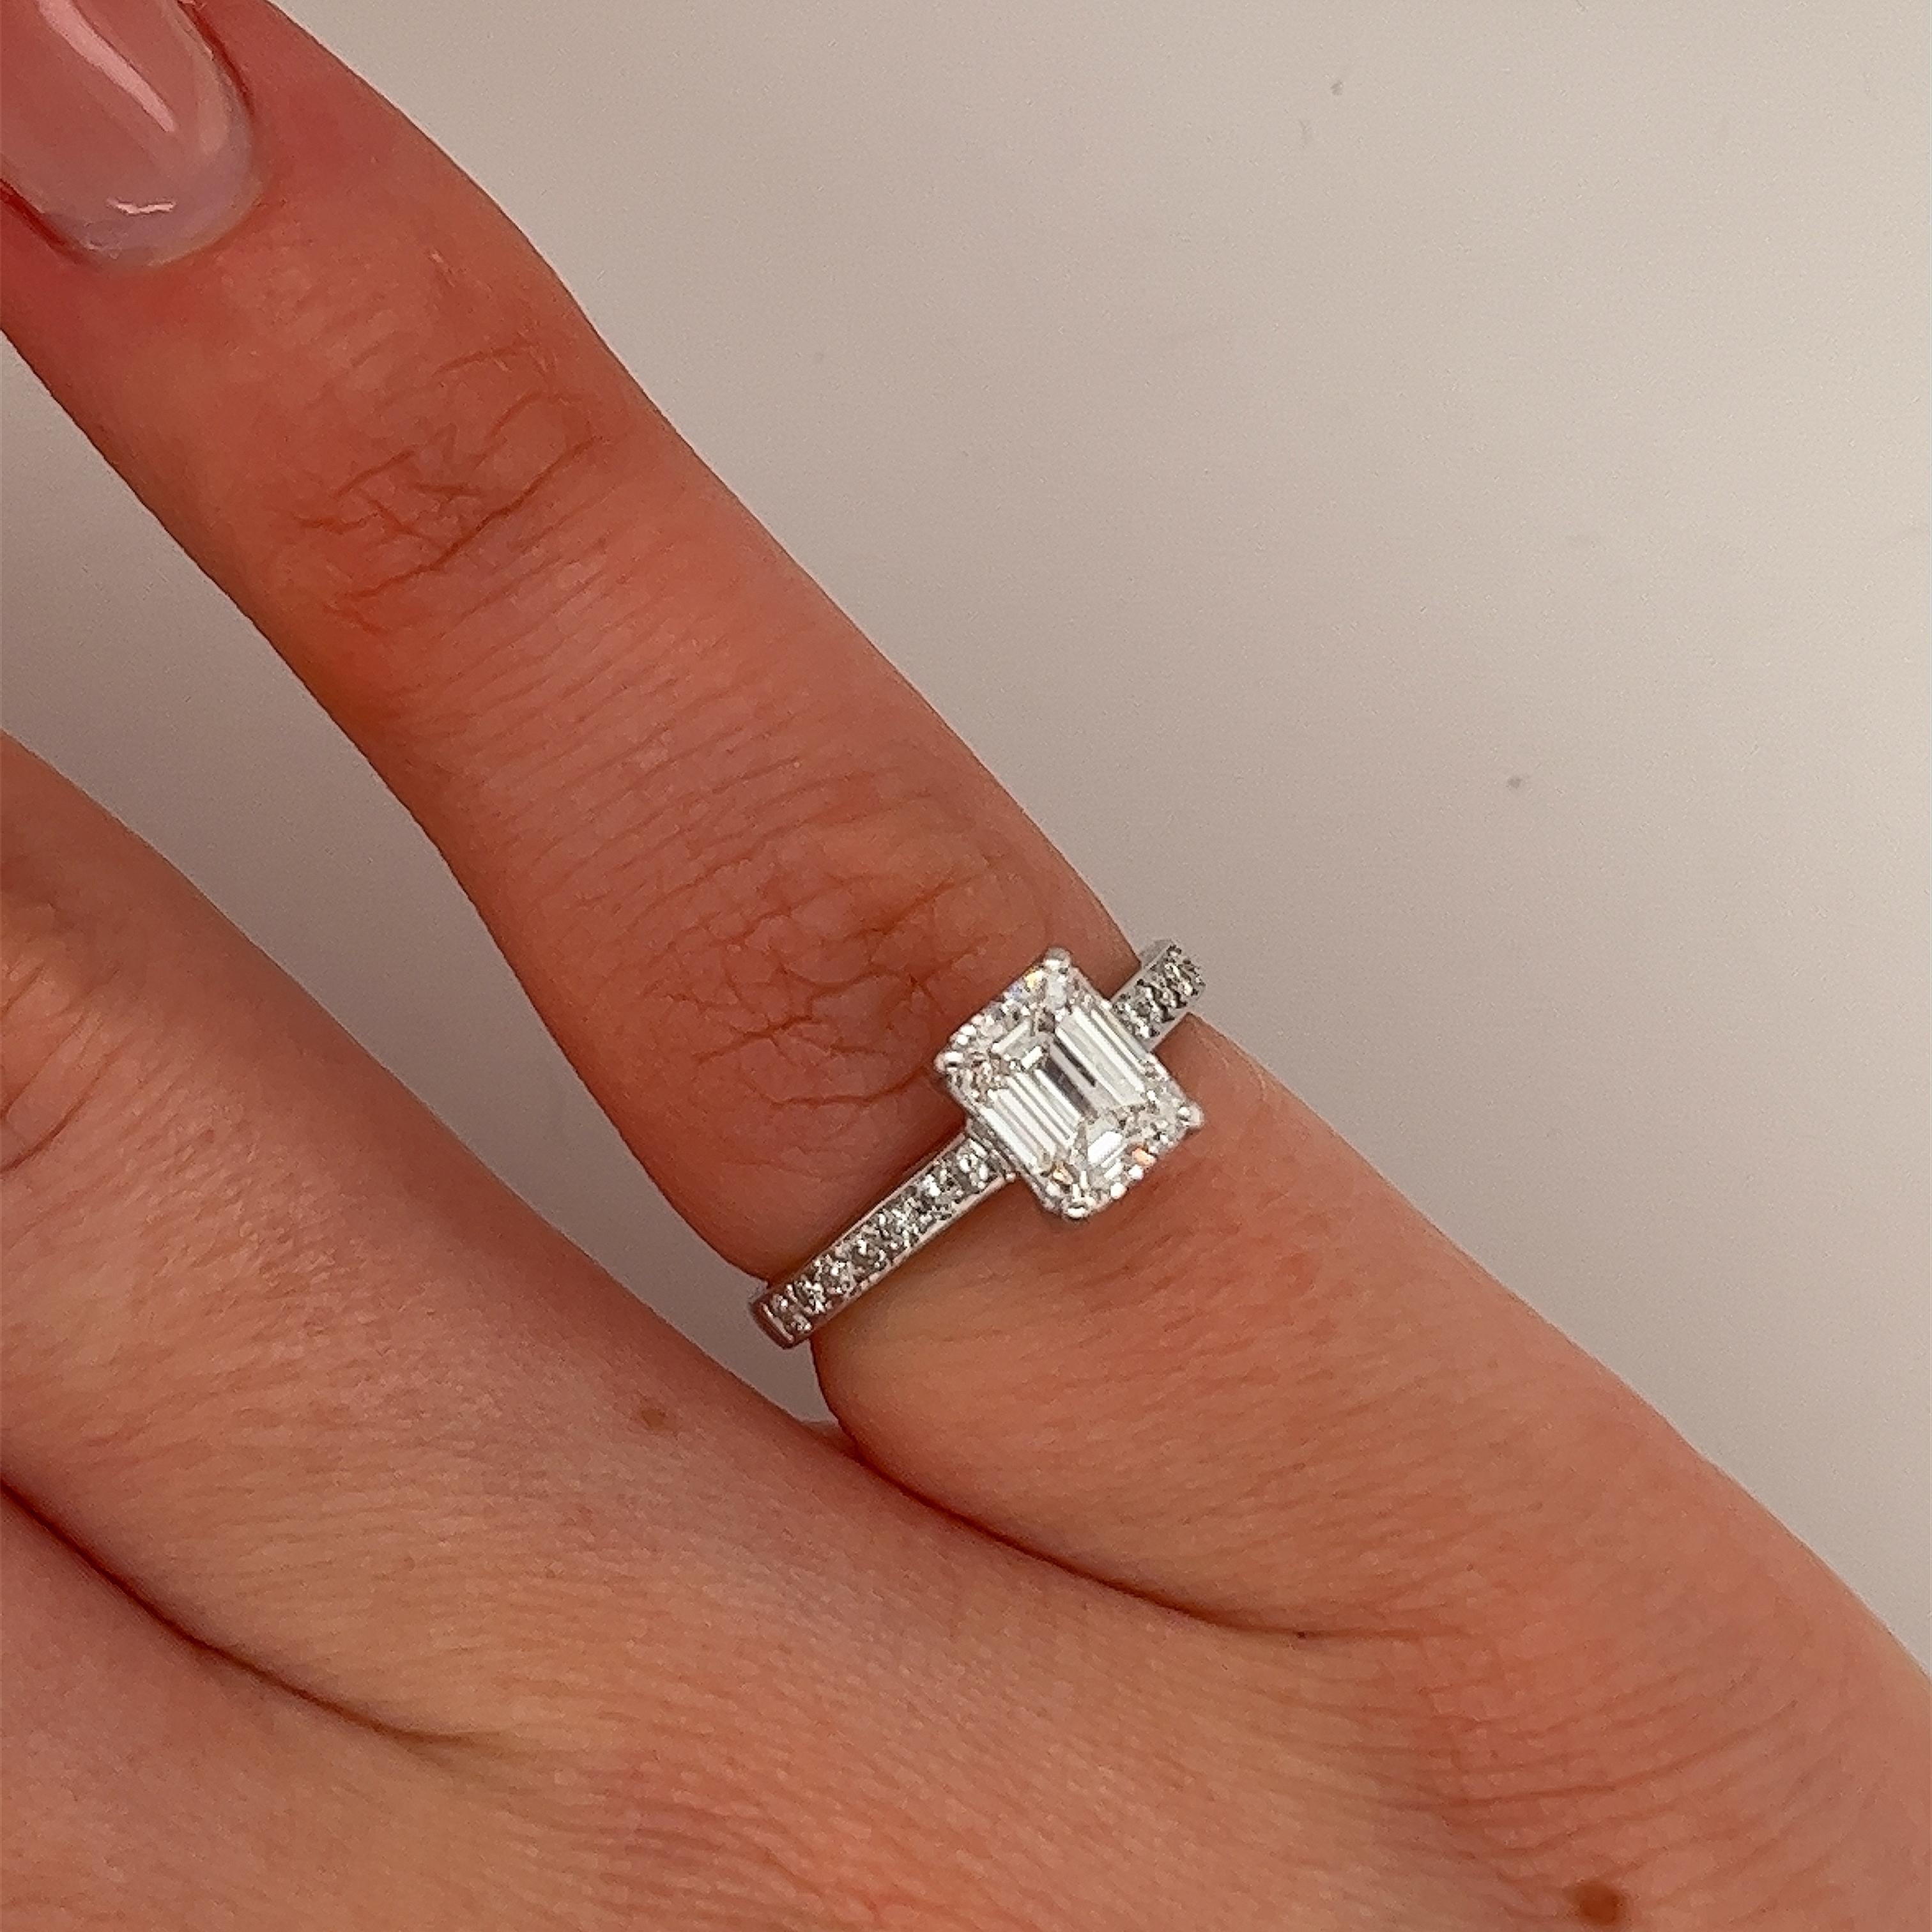 18ct White Gold Ring Set With 1.01ct E/SI1 Emerald Cut Diamond  For Sale 3